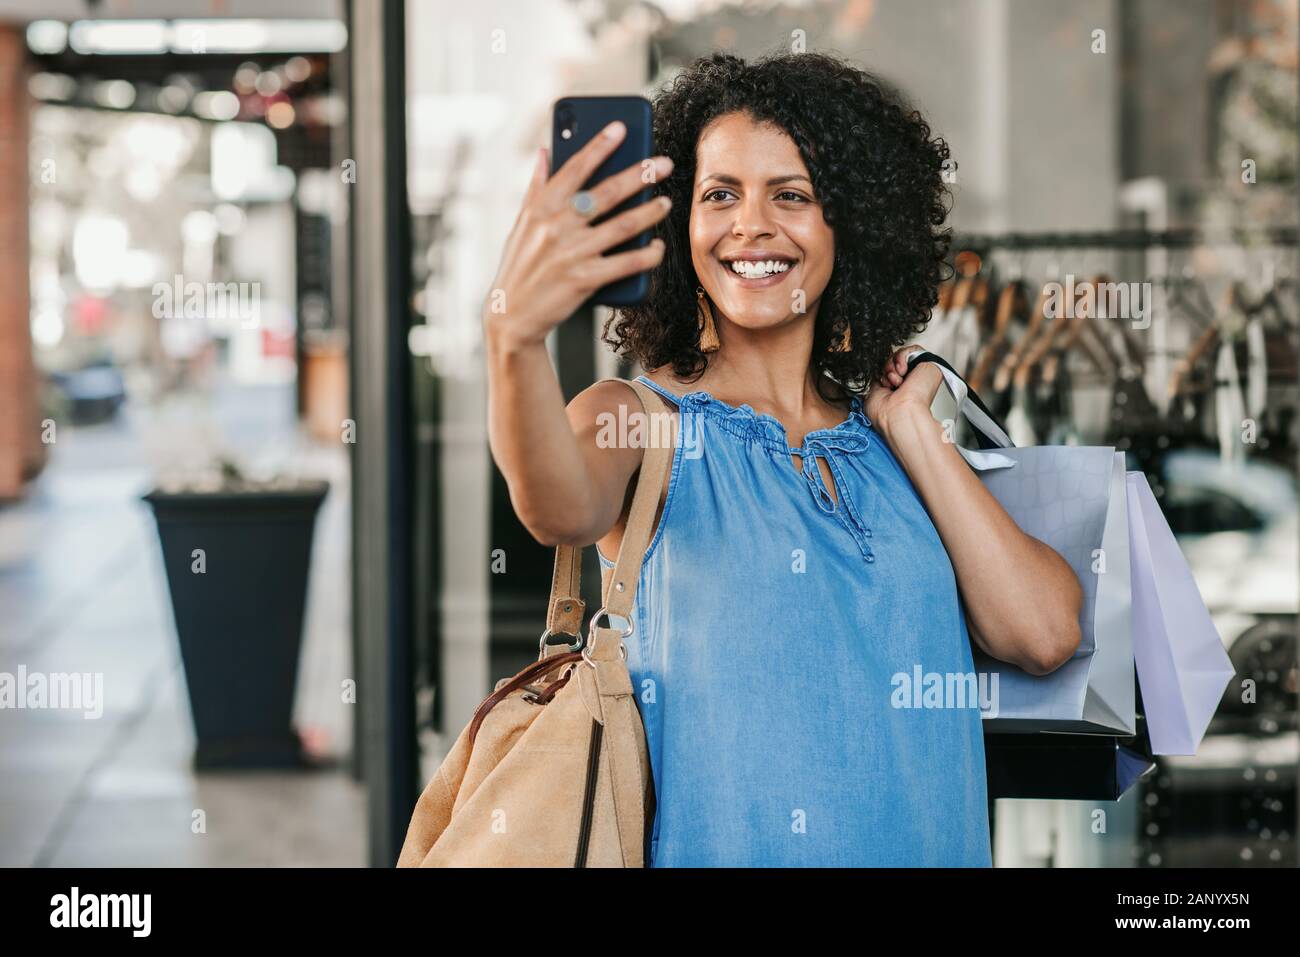 Smiling young woman taking a selfie while out clothes shopping Stock Photo